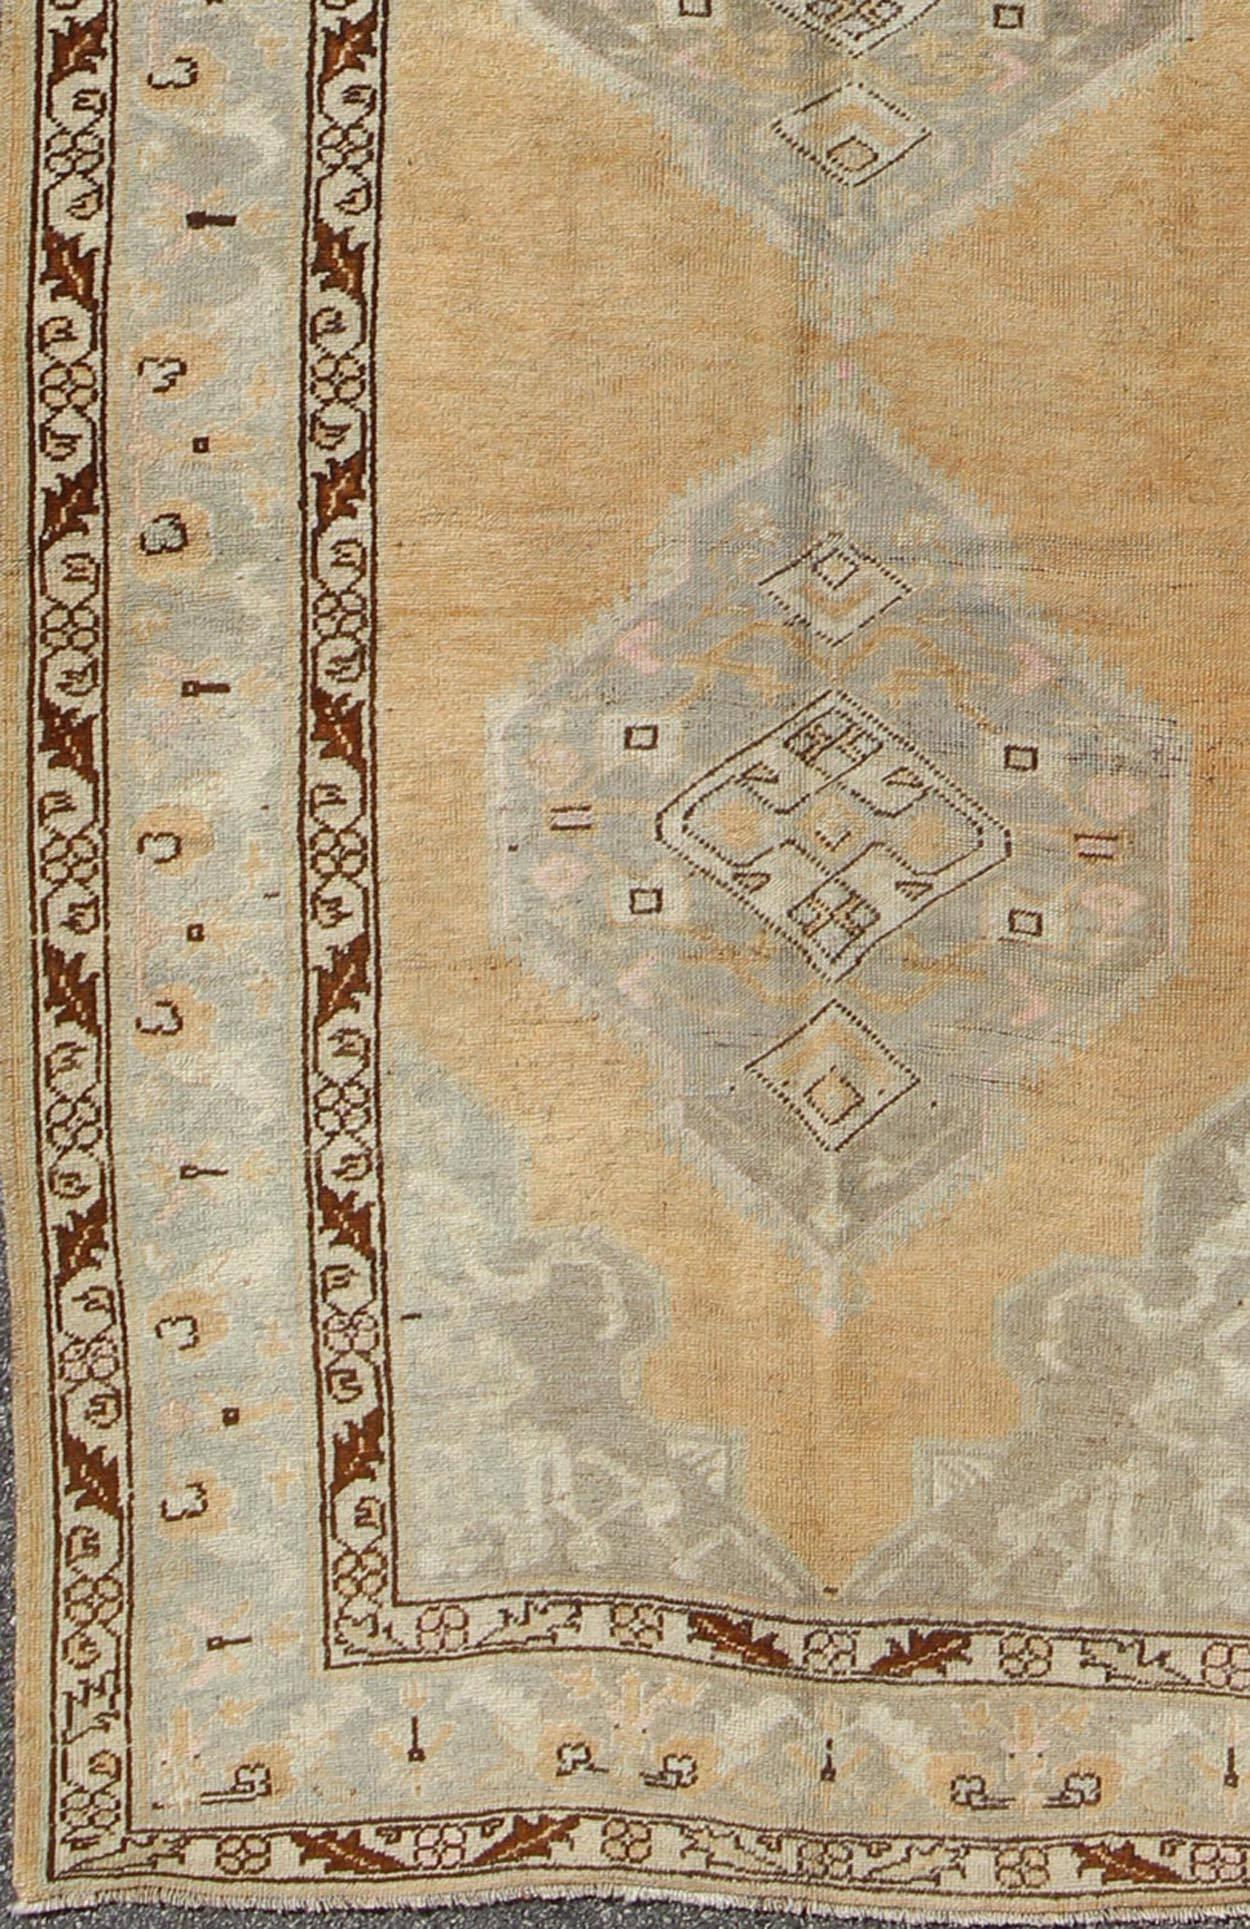  Gallery Size Vintage Turkish Oushak Runner With Medallions in Taupe, Brown, Peach, Light Green . Keivan Woven Arts/ rug/ En-92478, country of origin / type: Turkey / Oushak, circa 1940

Measures: 5'2 x 12'3

This vintage Turkish Oushak gallery